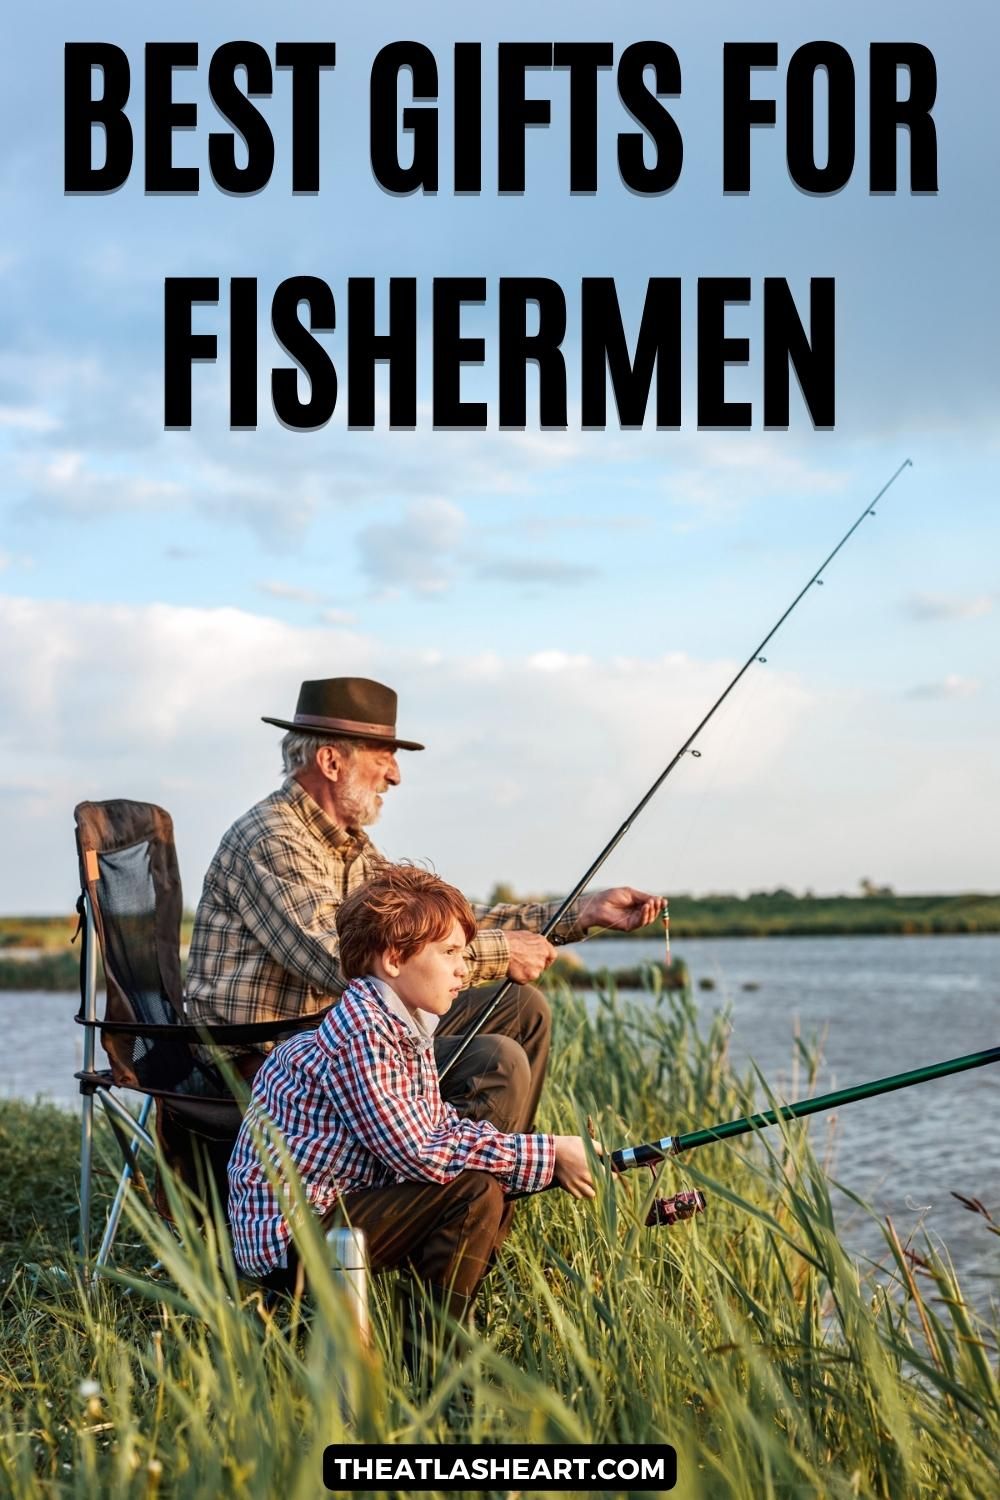 An older man in a brown, brimmed hat holding a fishing pole sits in a chair in tall grass on the banks of a lake with a young, red-haired boy in a checkered shirt sitting beside him holding a fishing pole, "Best Gifts for Fishermen."